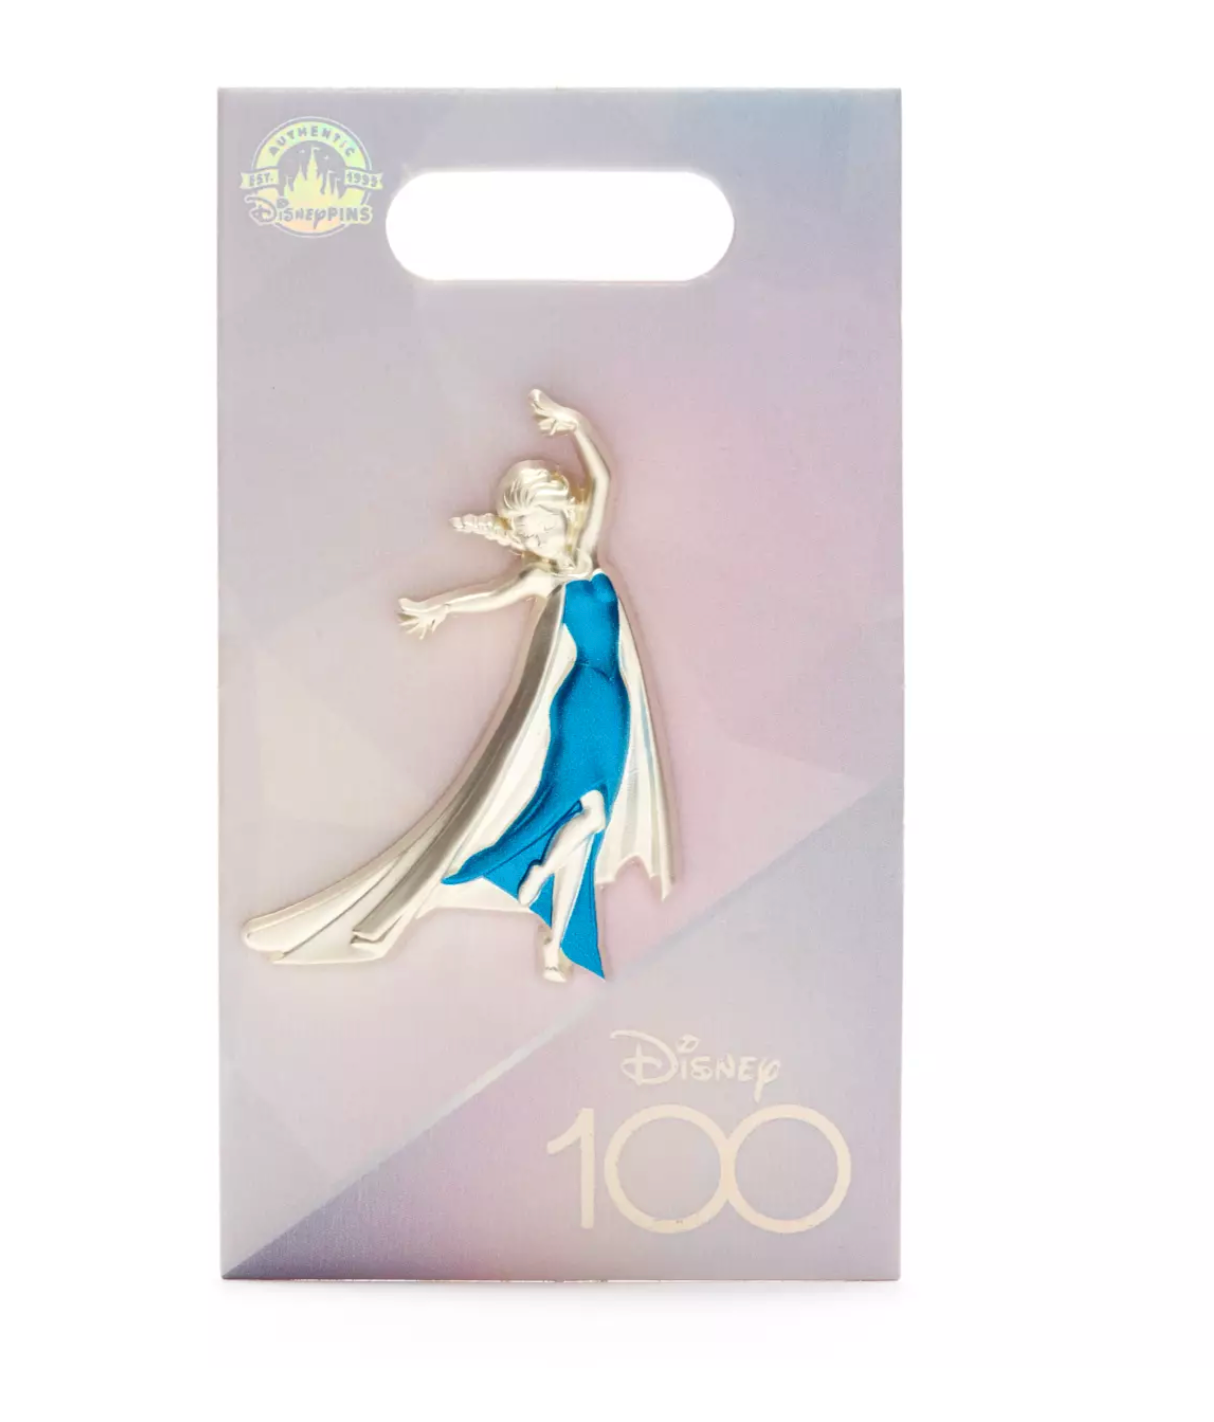 Disney 100 Years of Wonder Celebration Frozen Elsa 3D Pin New with Card